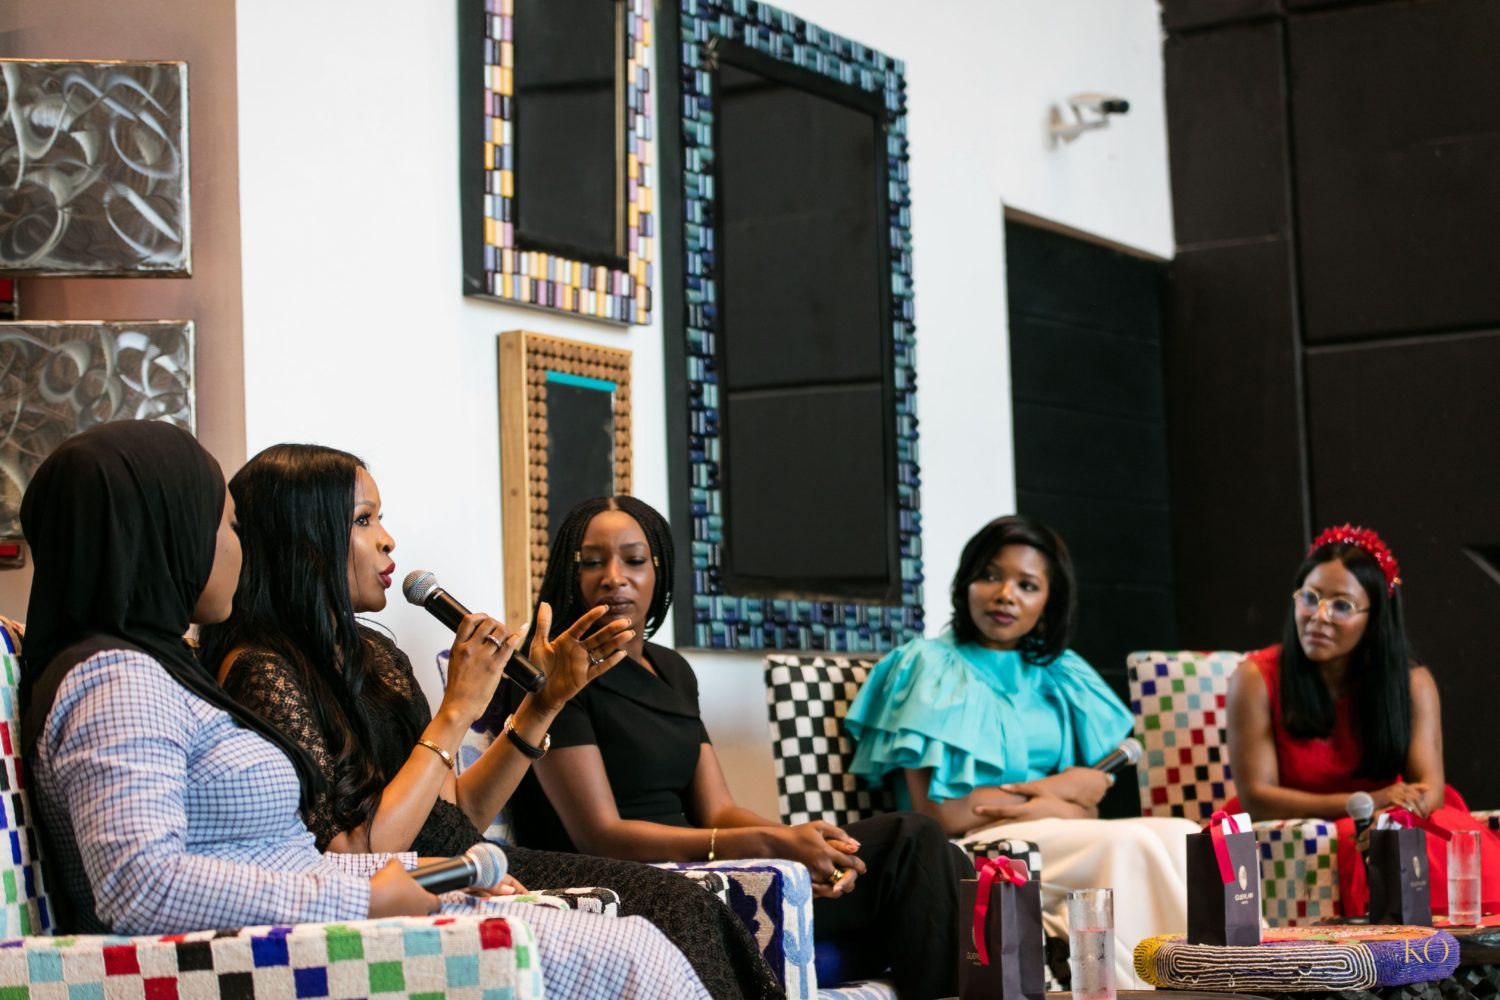 CLAN Hosted A Powerful Event For Women In ALÁRA  Over Cocktails & Canapés – Here’s All That Happened